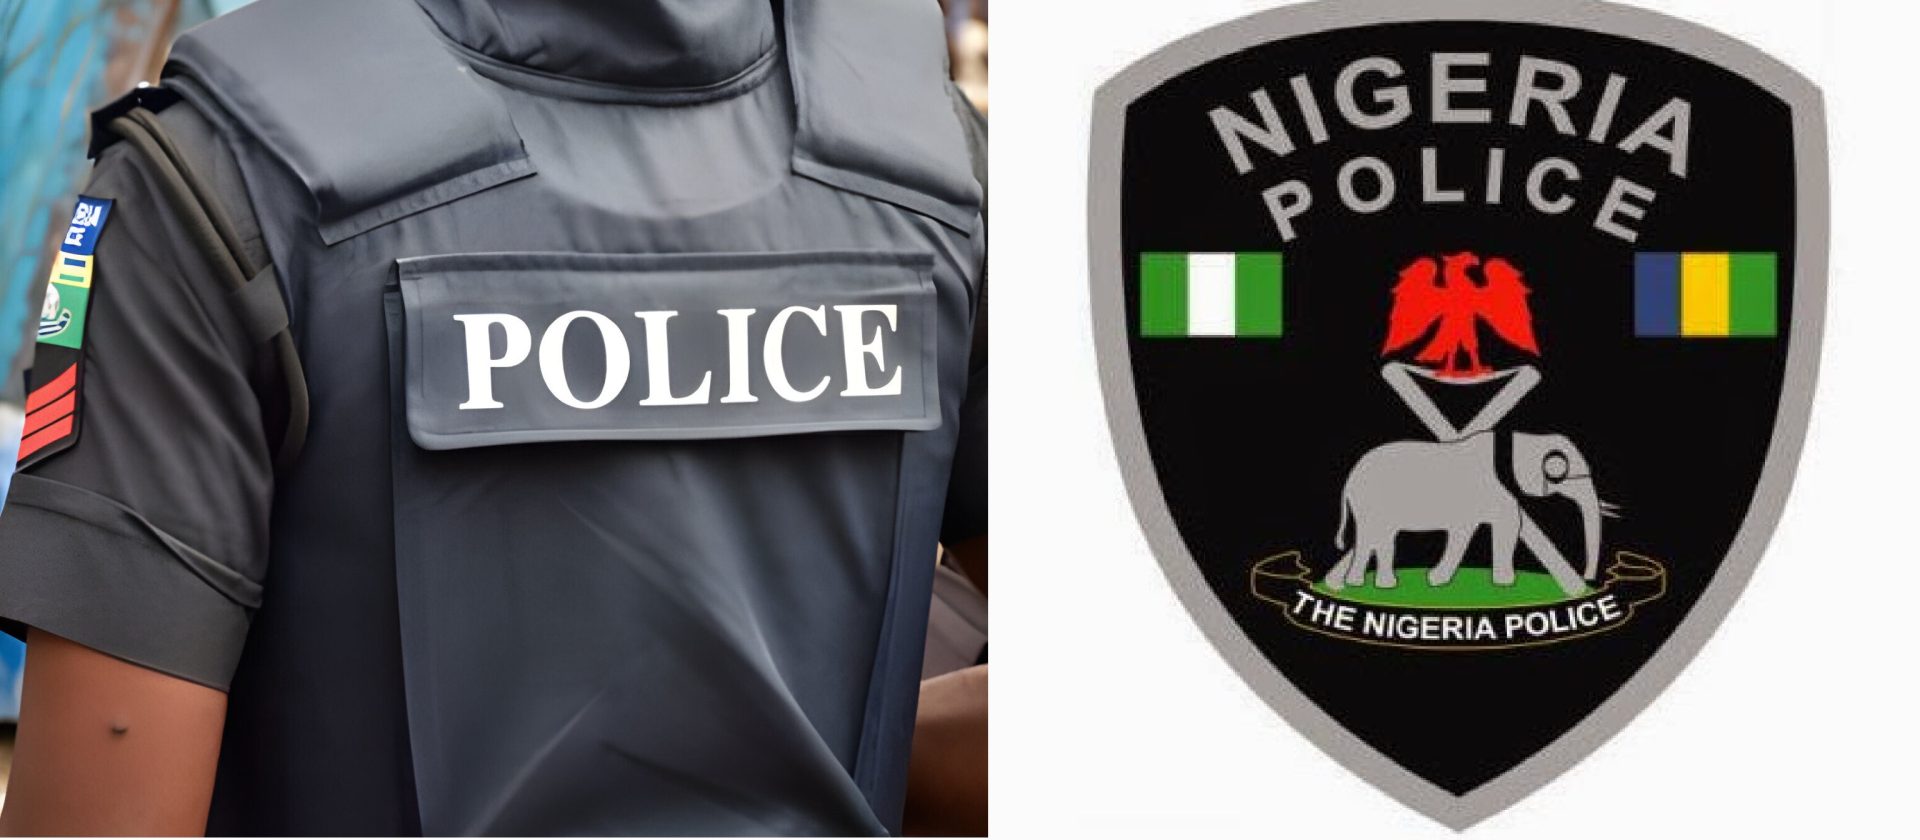 Growing Support for State Policing in Port Harcourt: Residents Express Concerns and Hopes